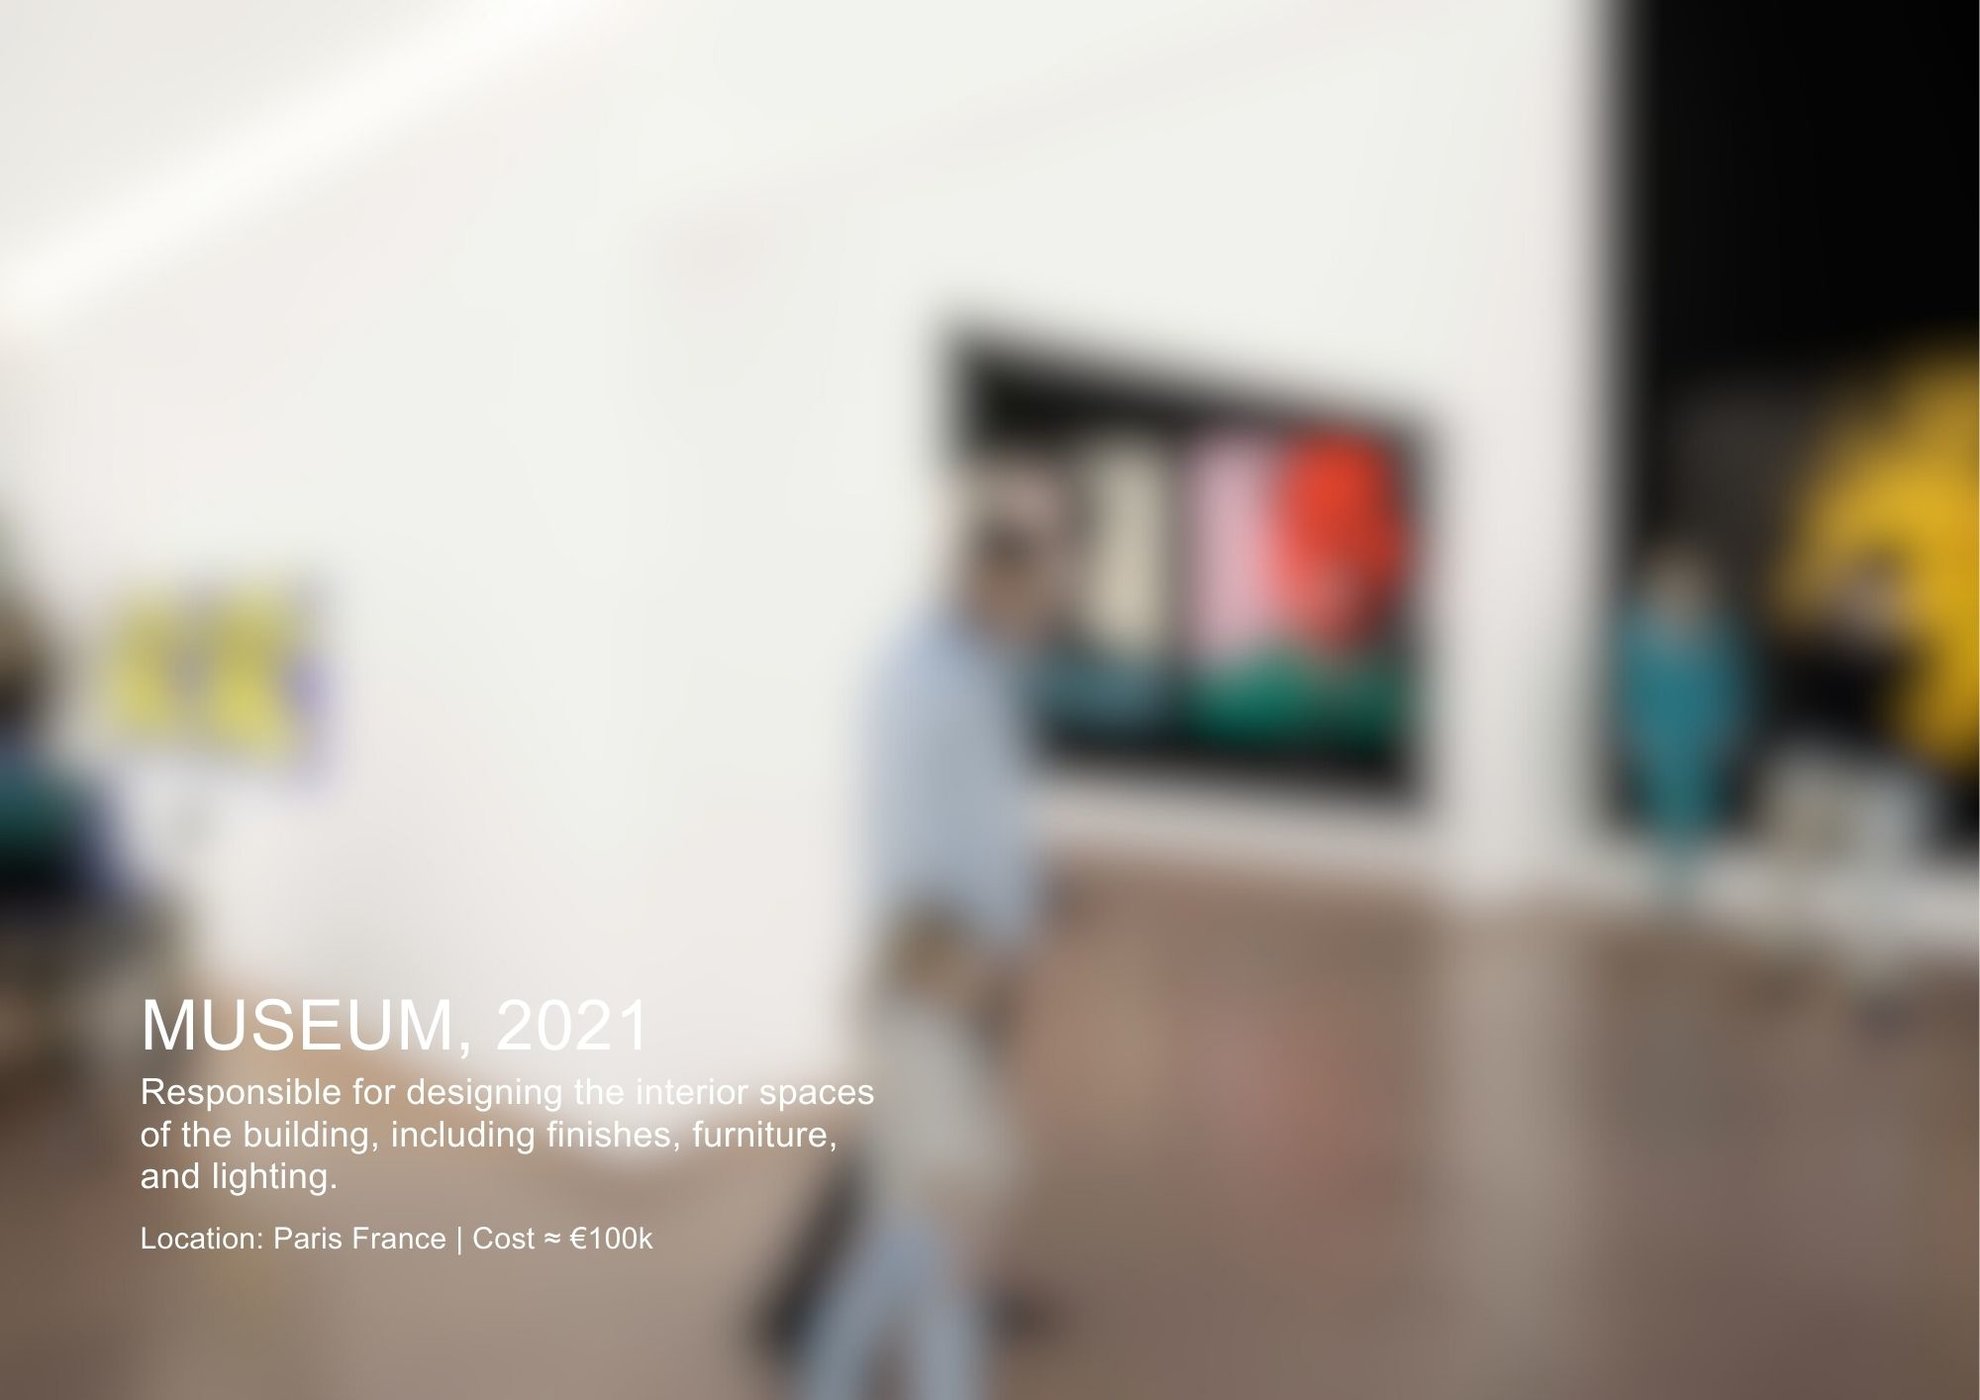 2021 Name of Project: Museum | Location: Paris, France | Cost ≈ €100k